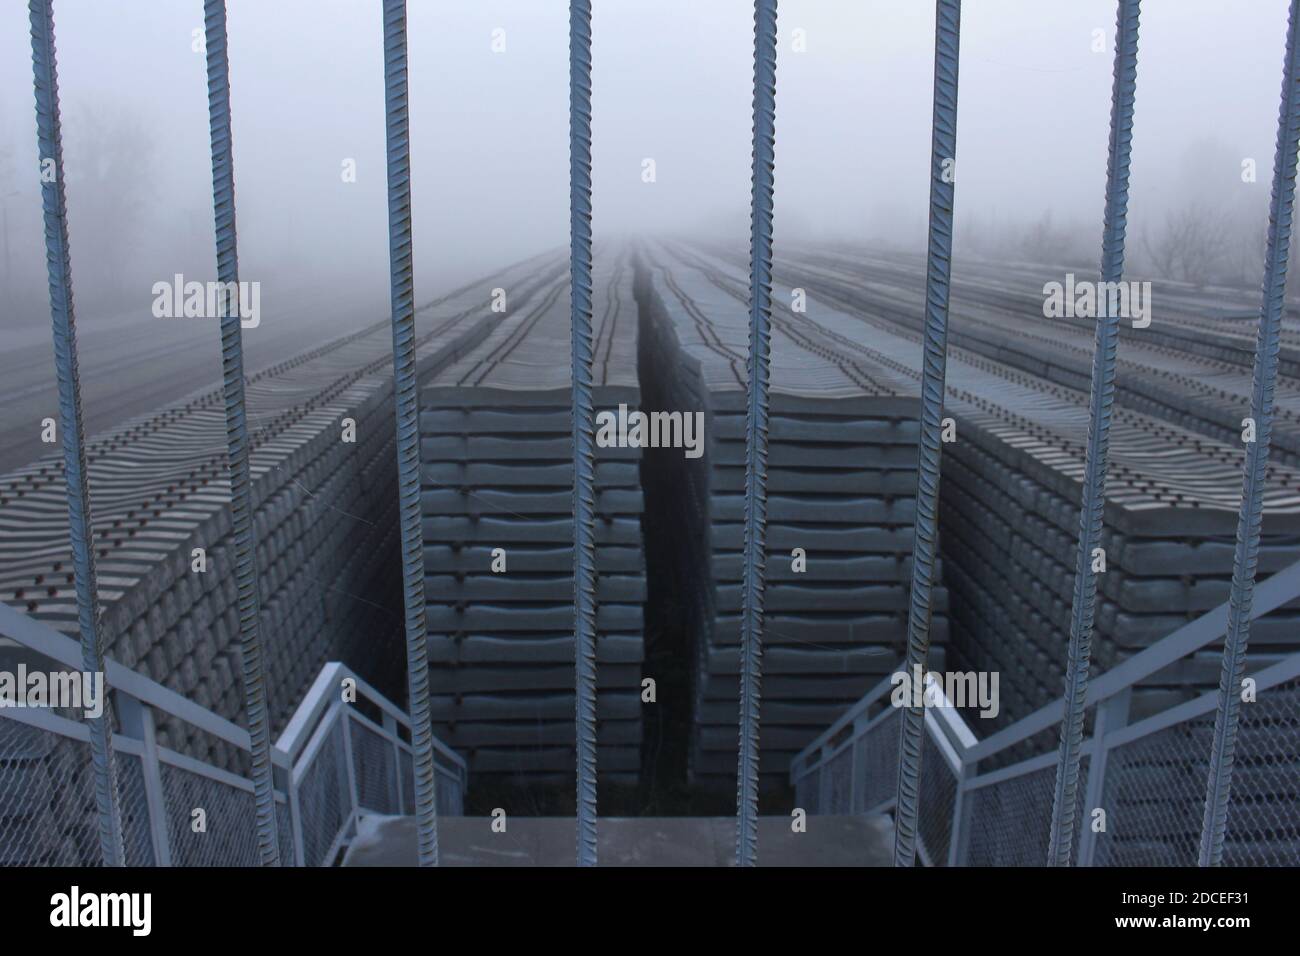 Concrete railway sleeper at a train station in Białystok during foggy weather Stock Photo